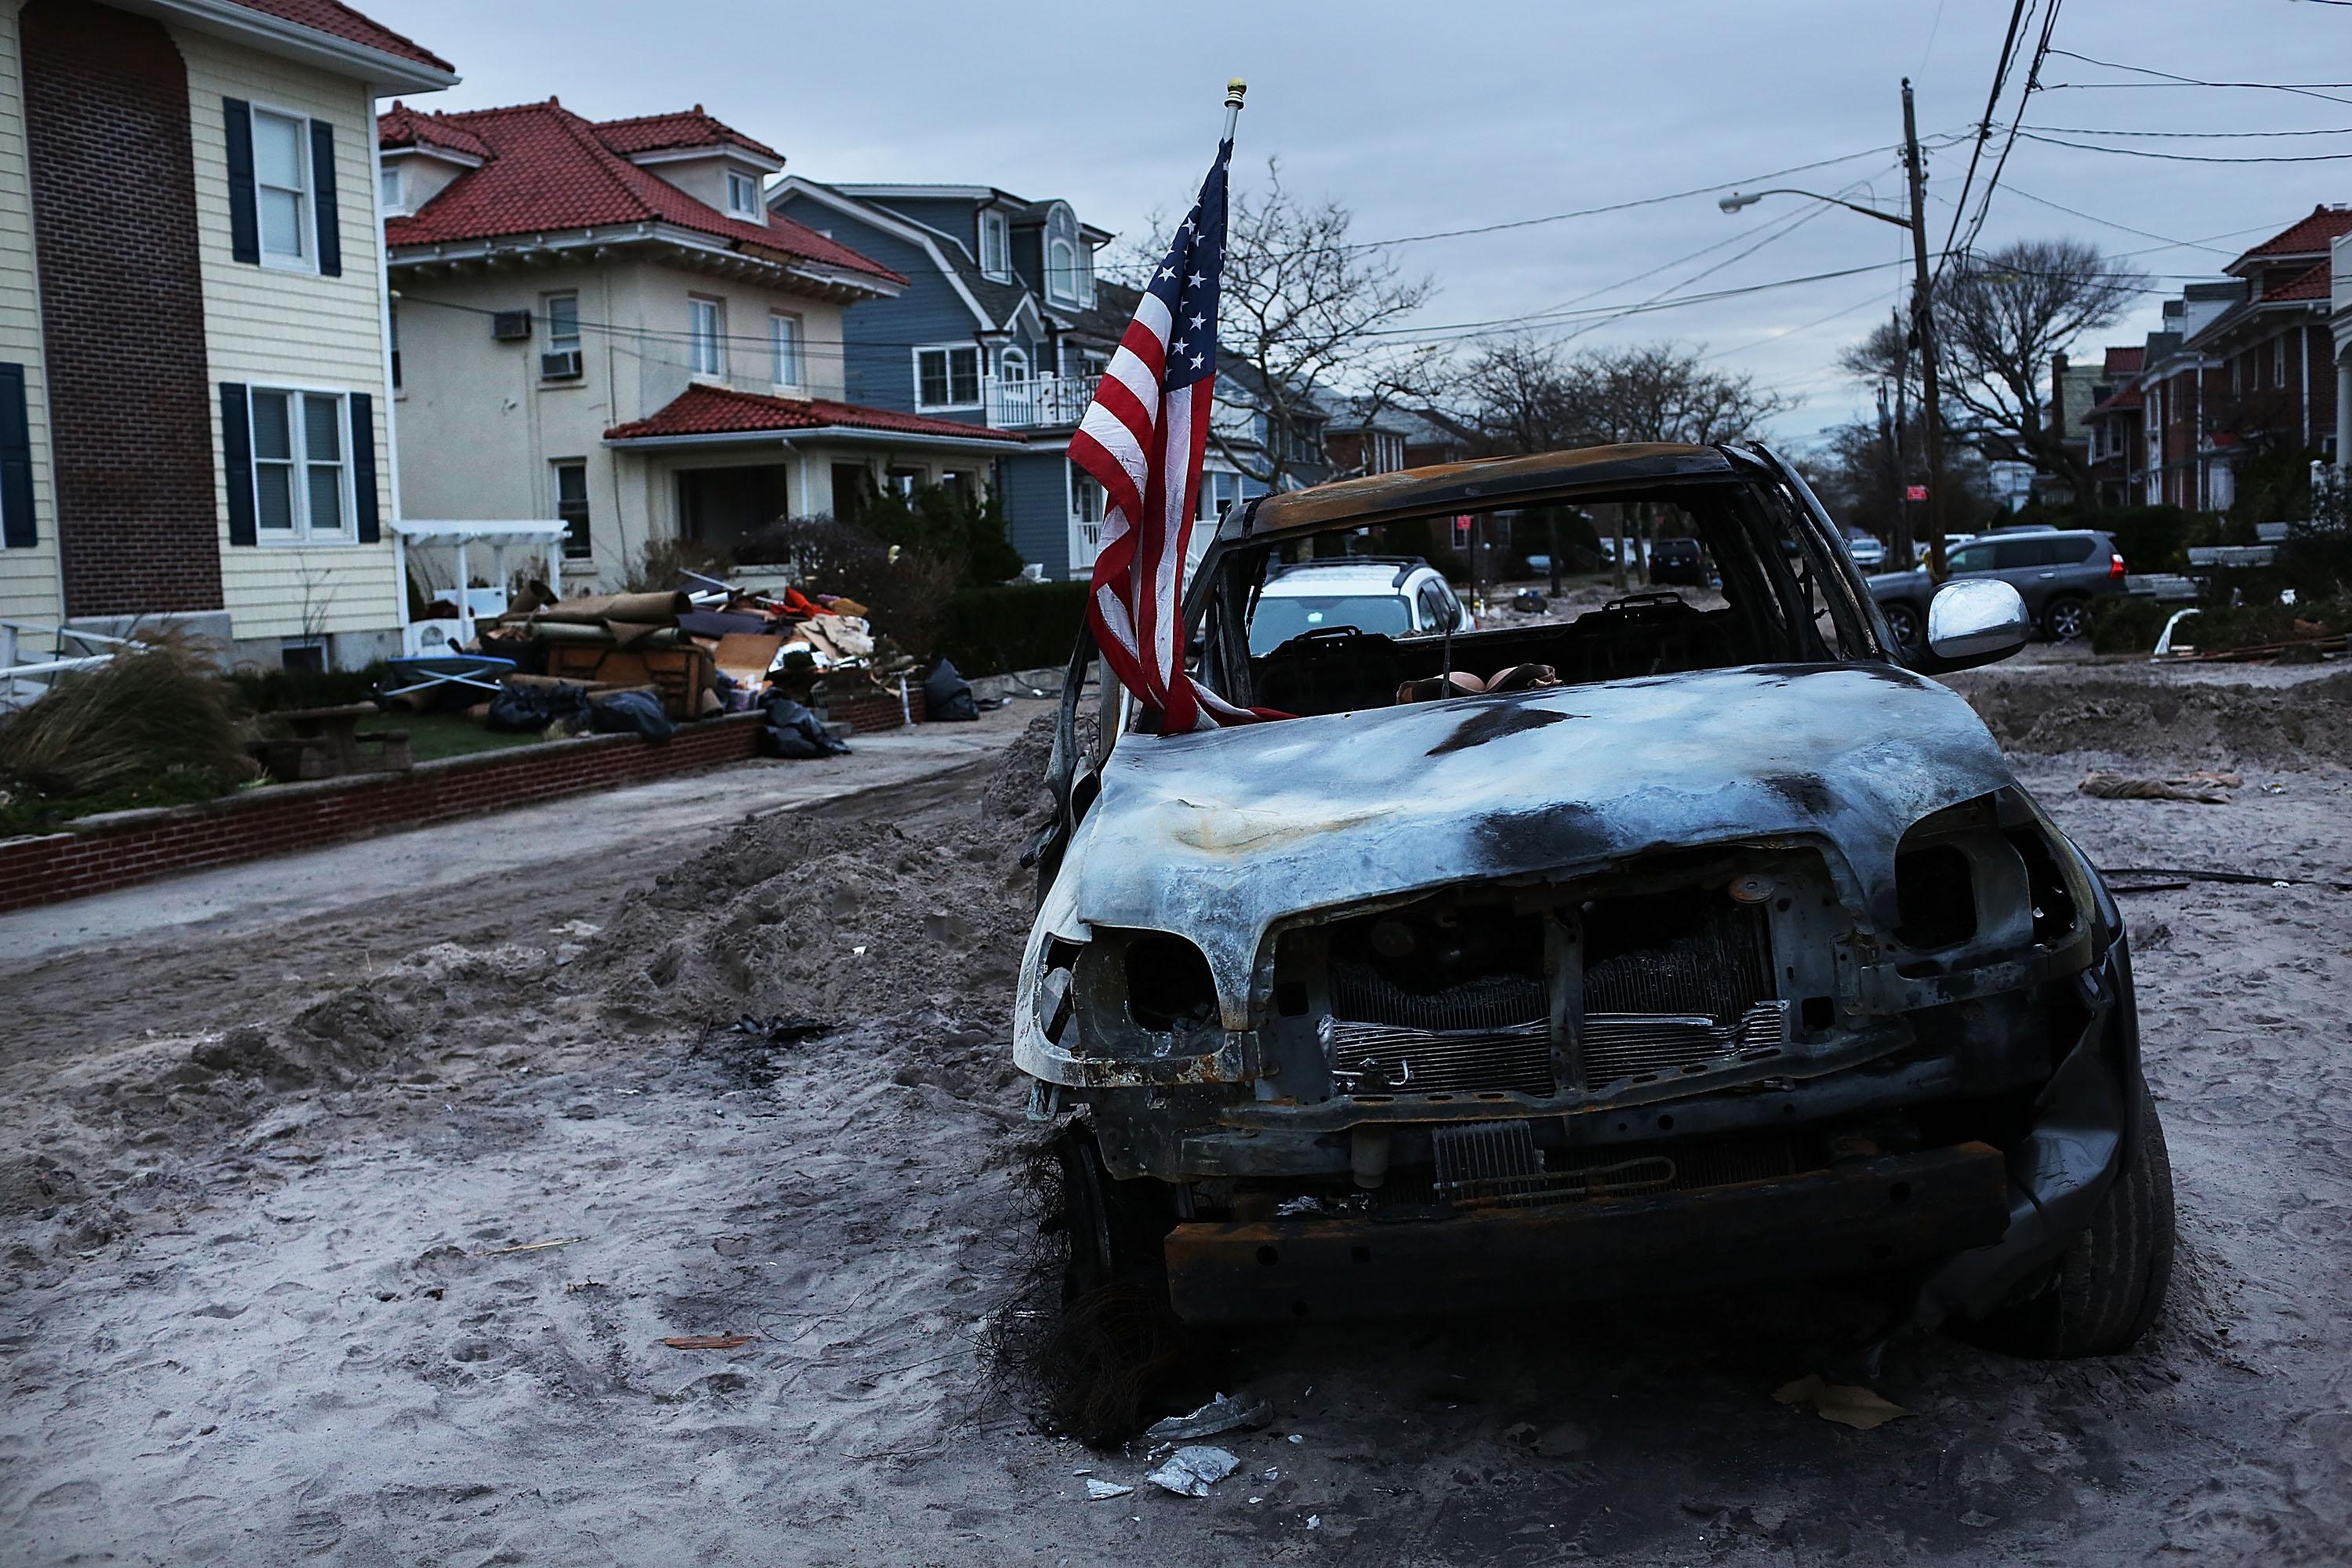 A destroyed car sits in the street in the heavily damaged Rockaway neighborhood, in Queens where a large section of the iconic boardwalk was washed away on November 2, 2012 in New York.